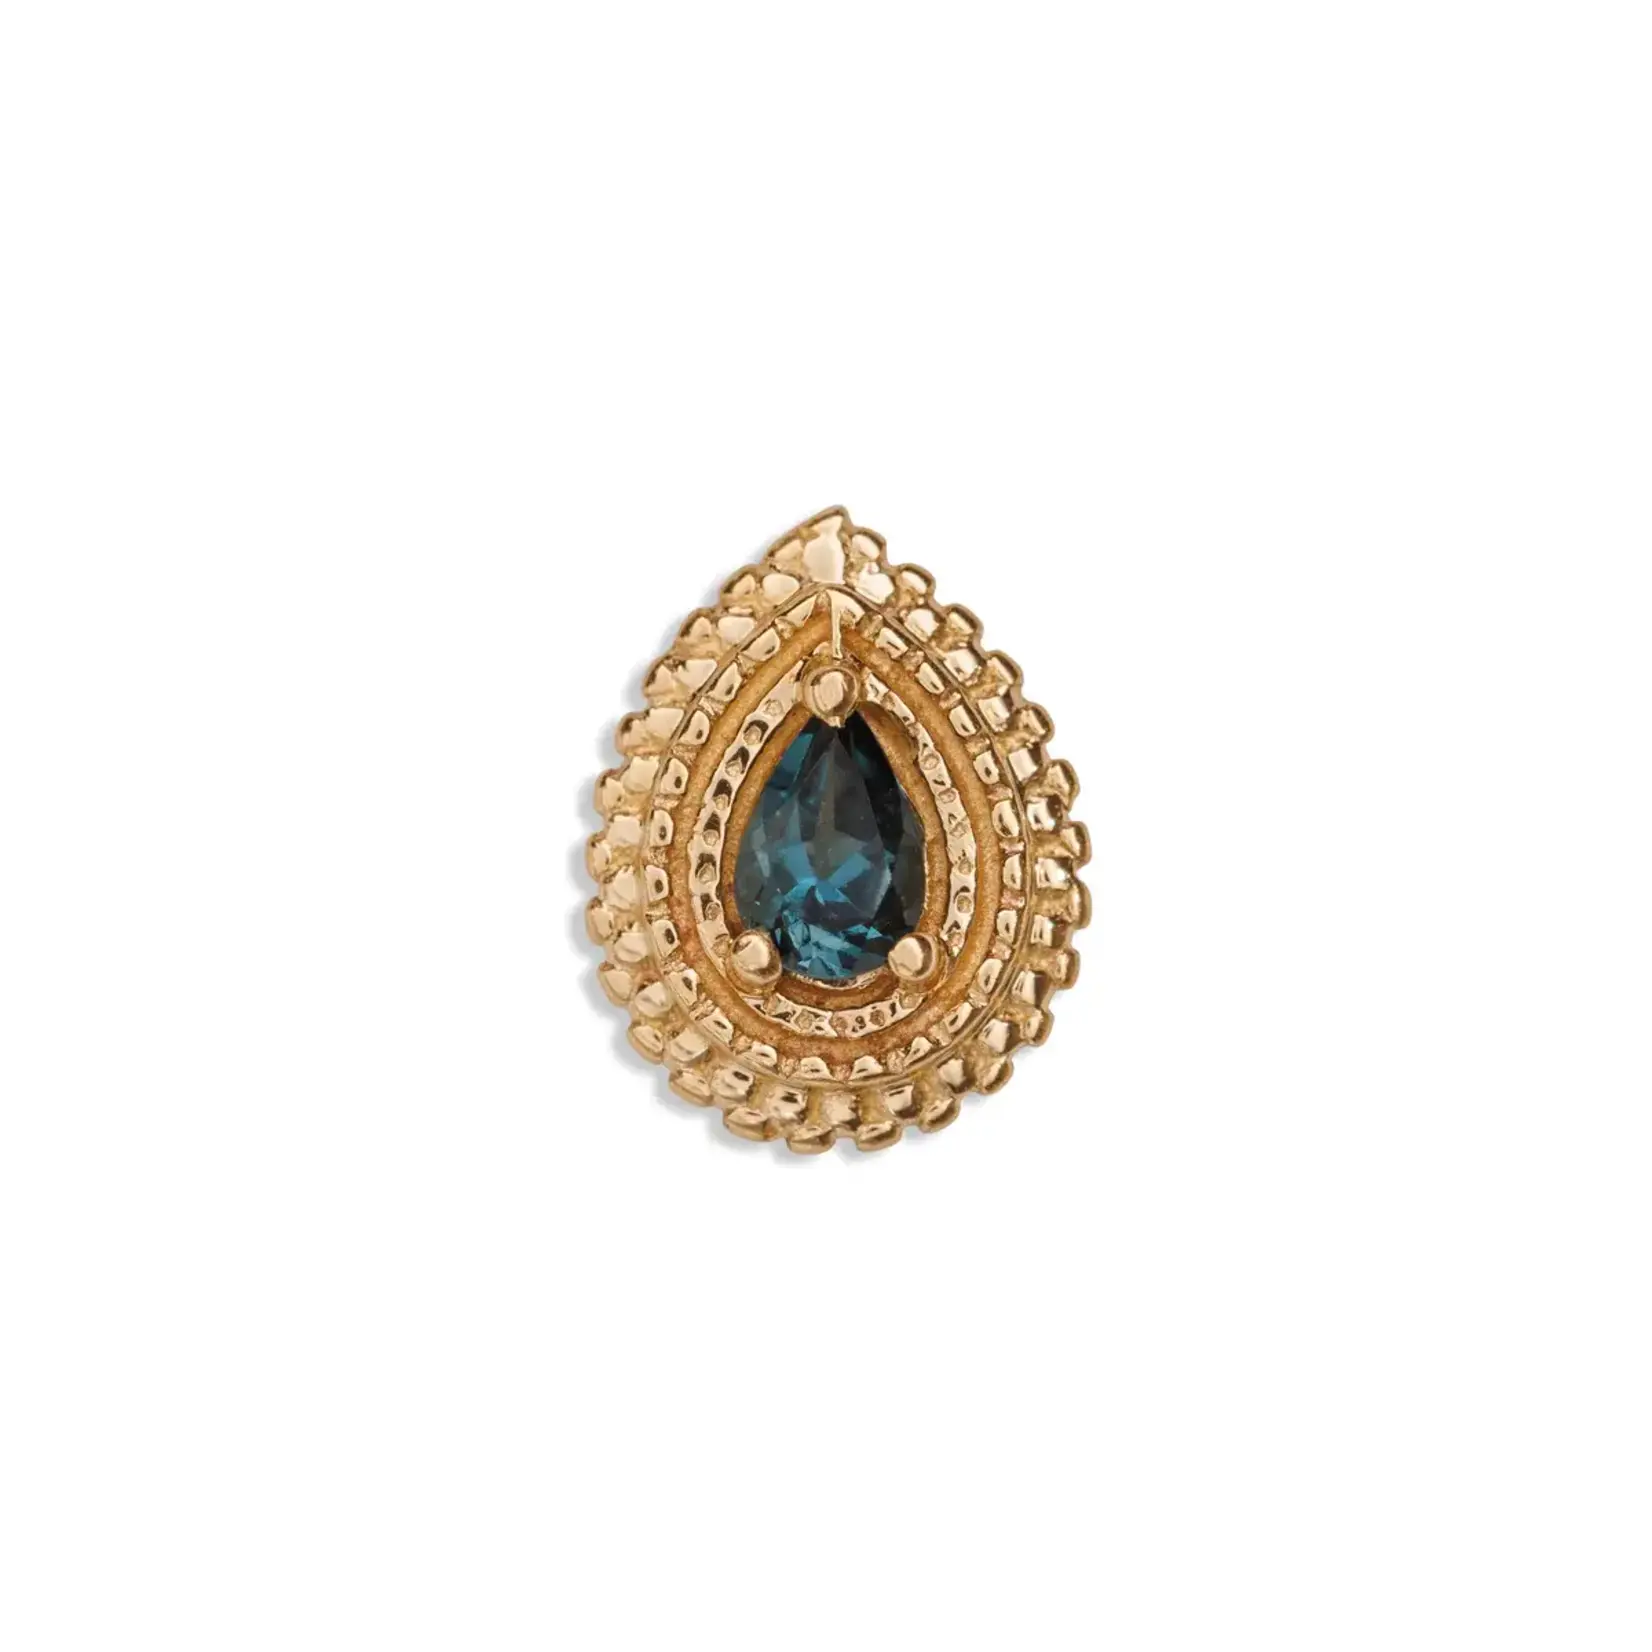 BVLA BVLA "Afghan Pear" threaded end with AA London Blue Topaz